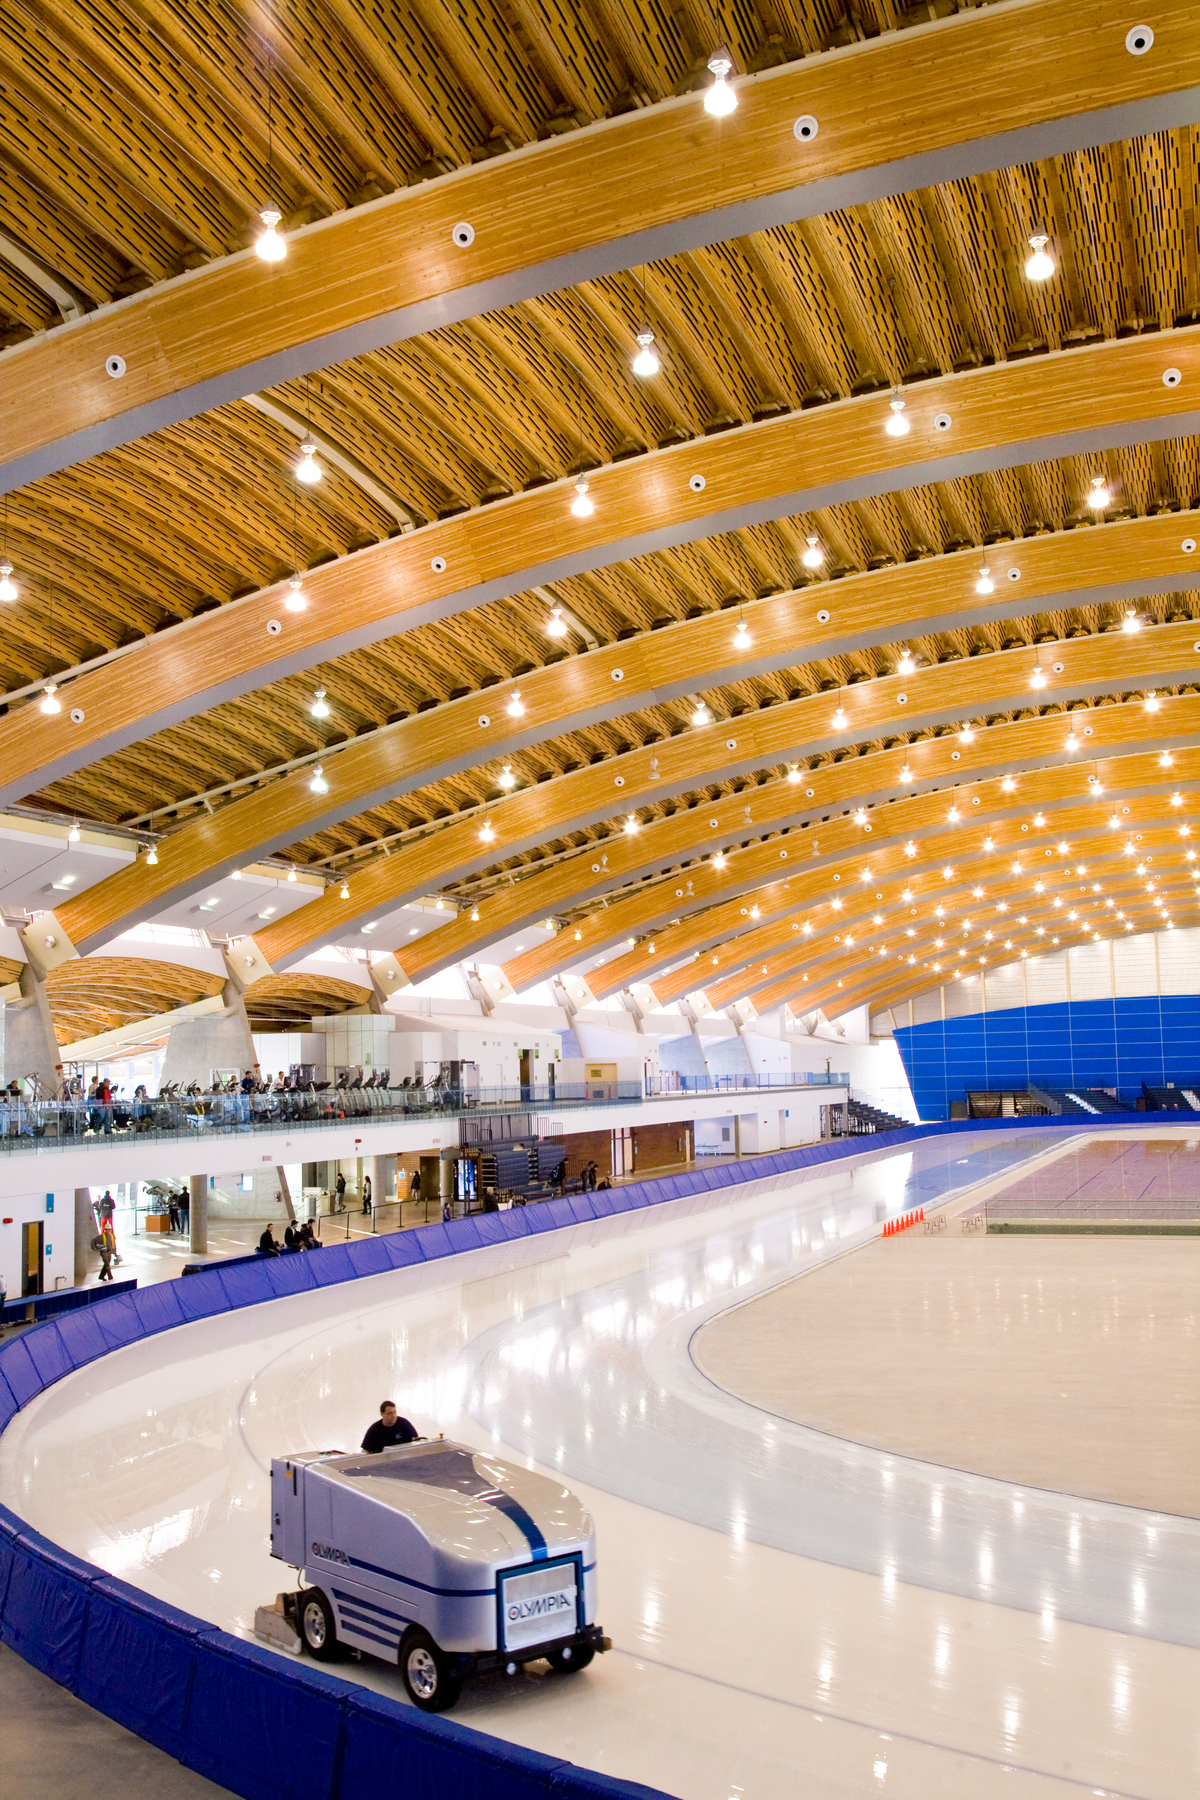 Interior daytime image of glue-laminated timber (Glulam), and wooden roof accents as featured in this interior occupied arena view of the Richmond Olympic Oval complex